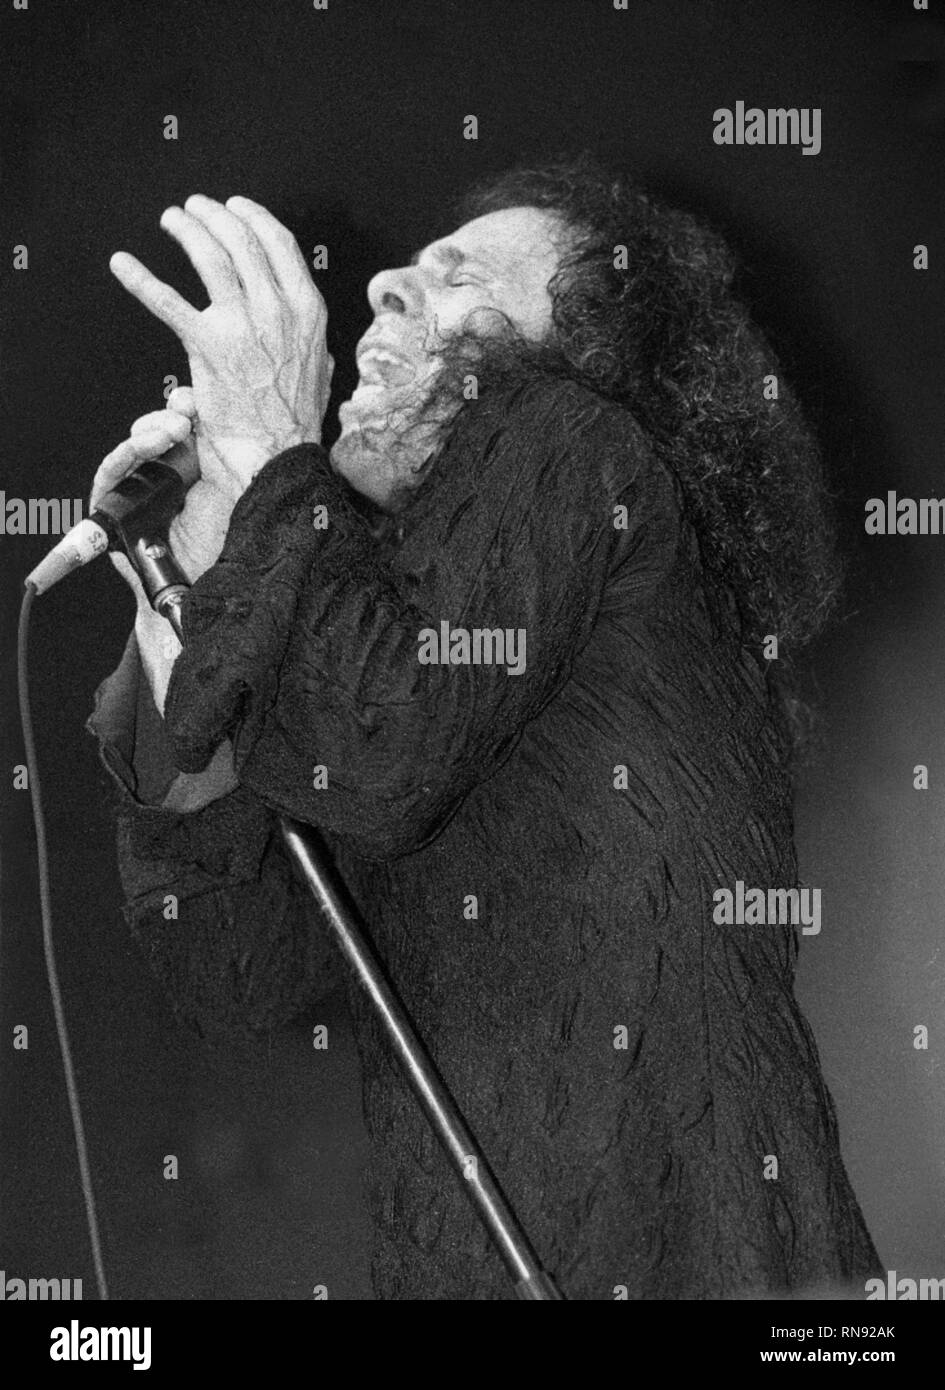 Singer Ronnie James Dio is shown performing on stage during a 'live' concert appearance. Stock Photo